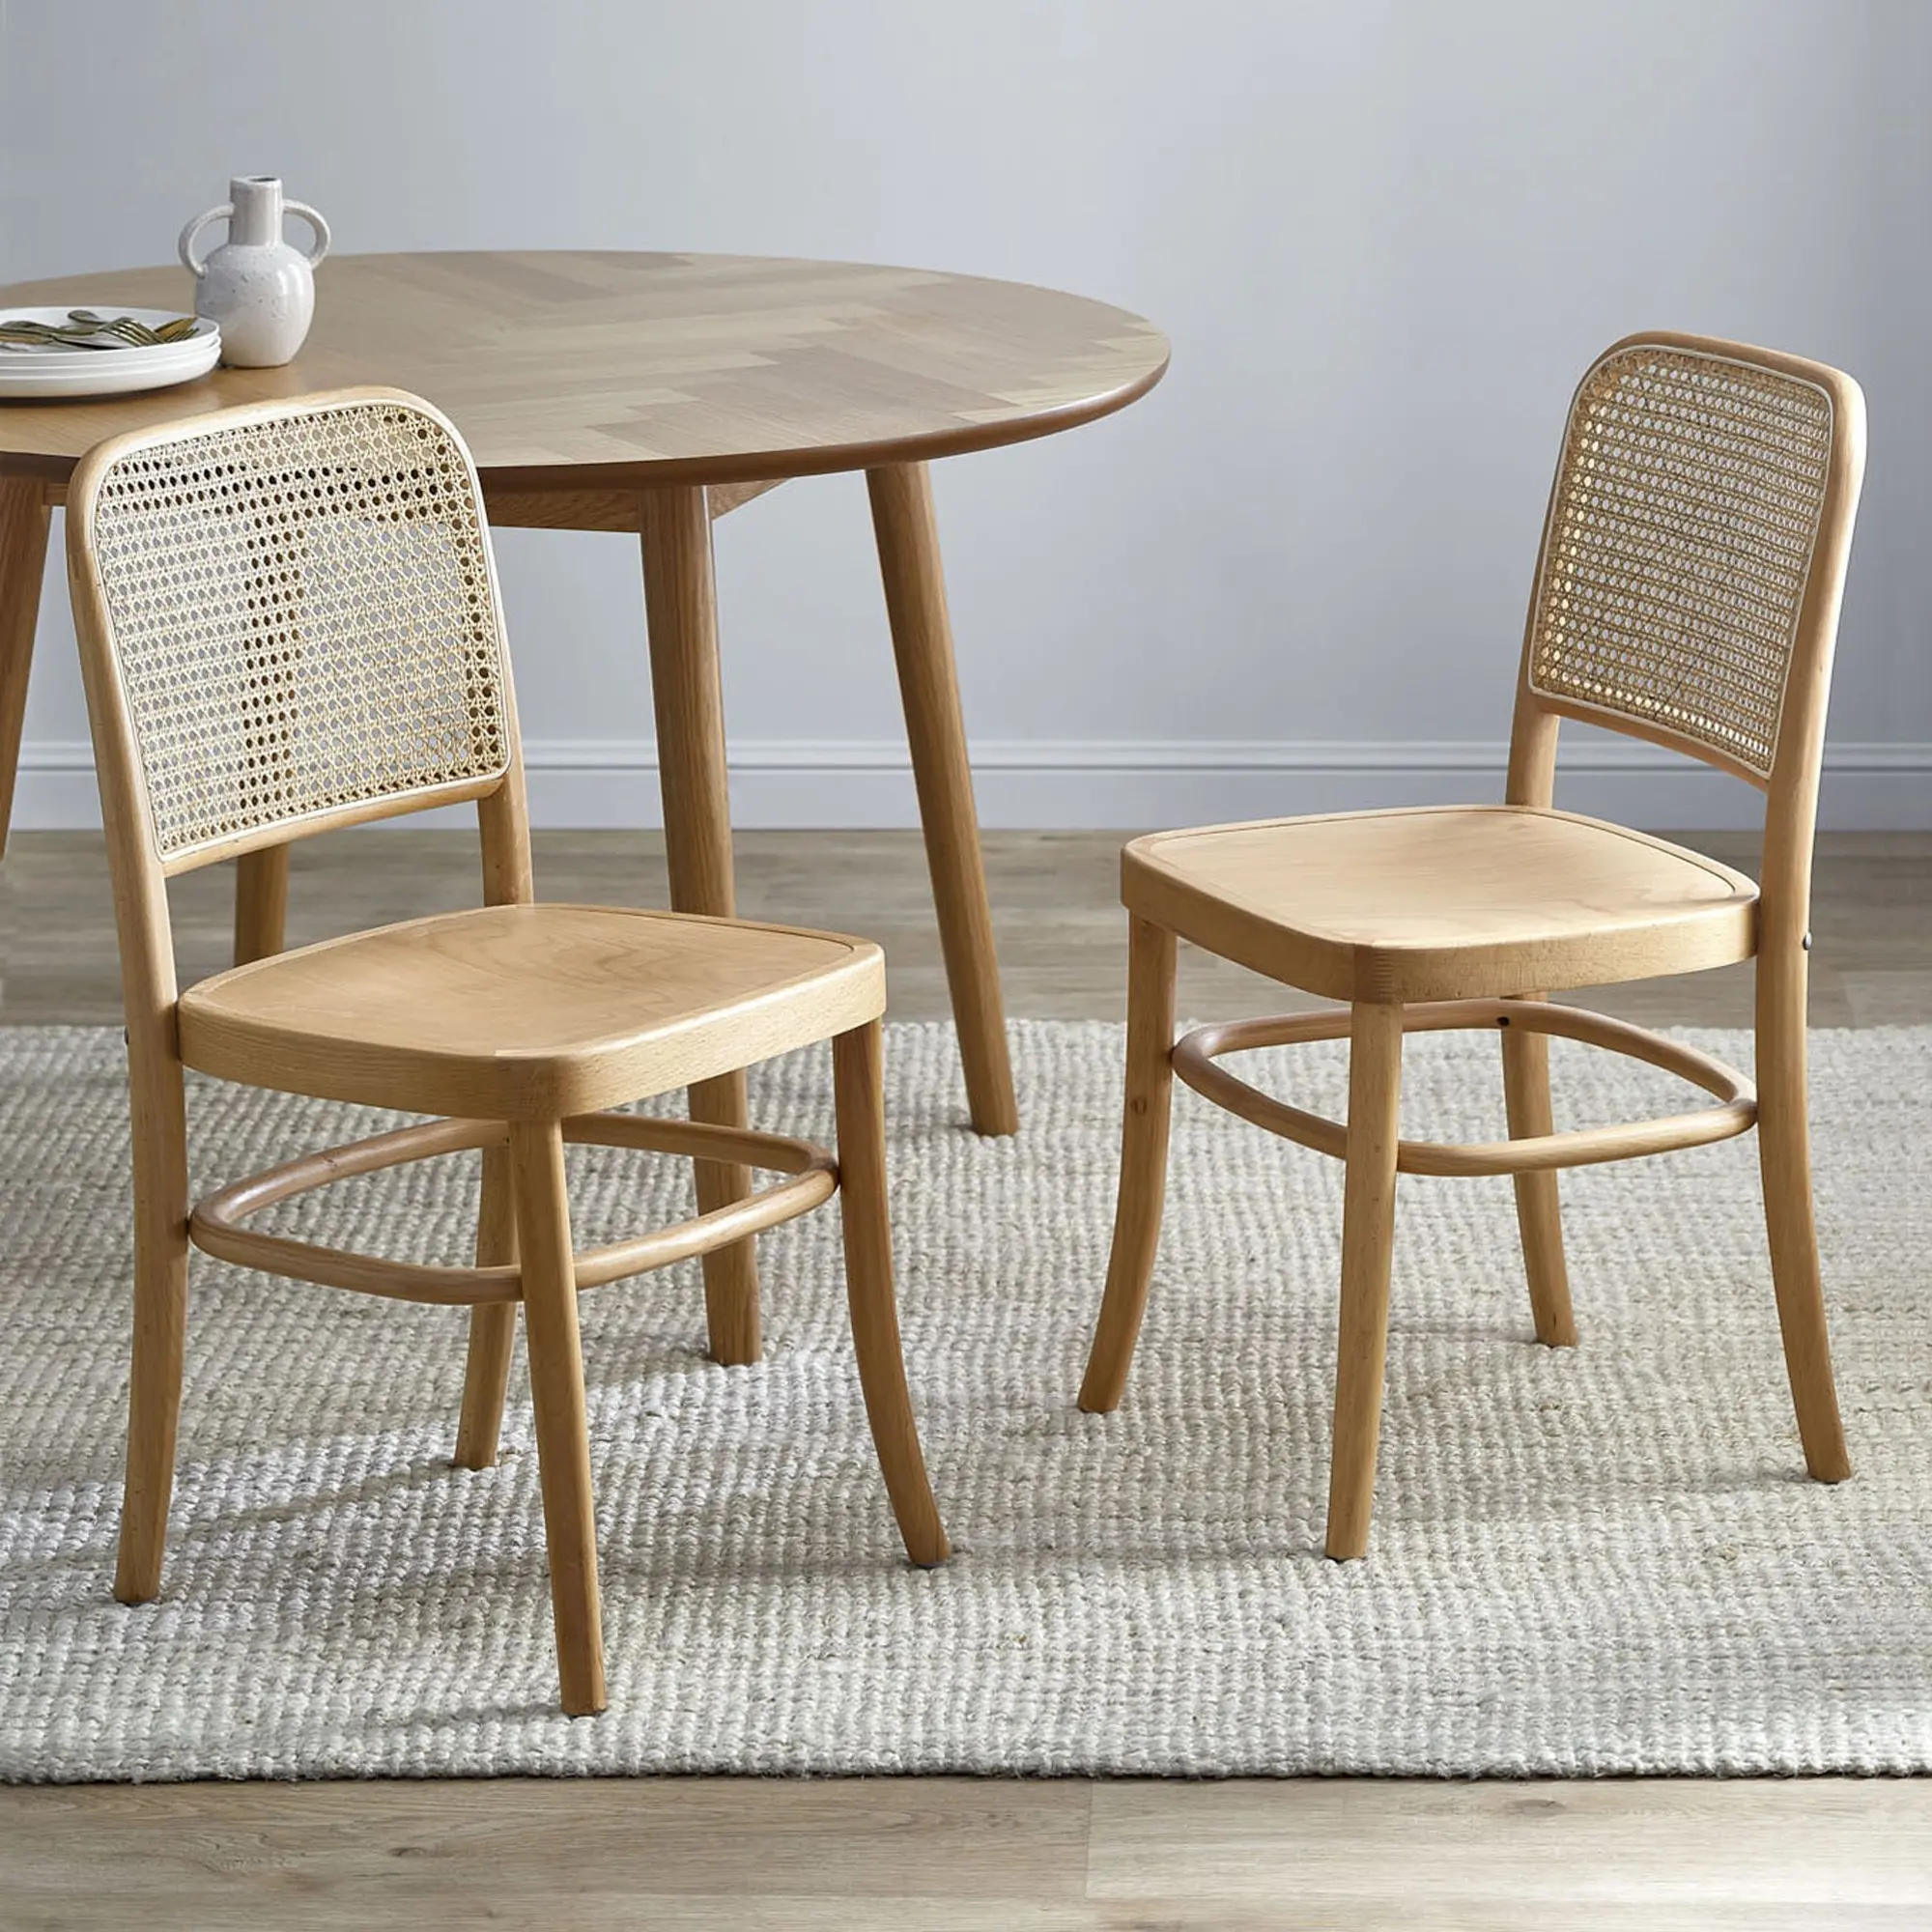 High Quality Rattan and Wood Side Dining Chair Modern Design Scandinavian Style Luxury Home Hotel Dining Chair Room Furniture